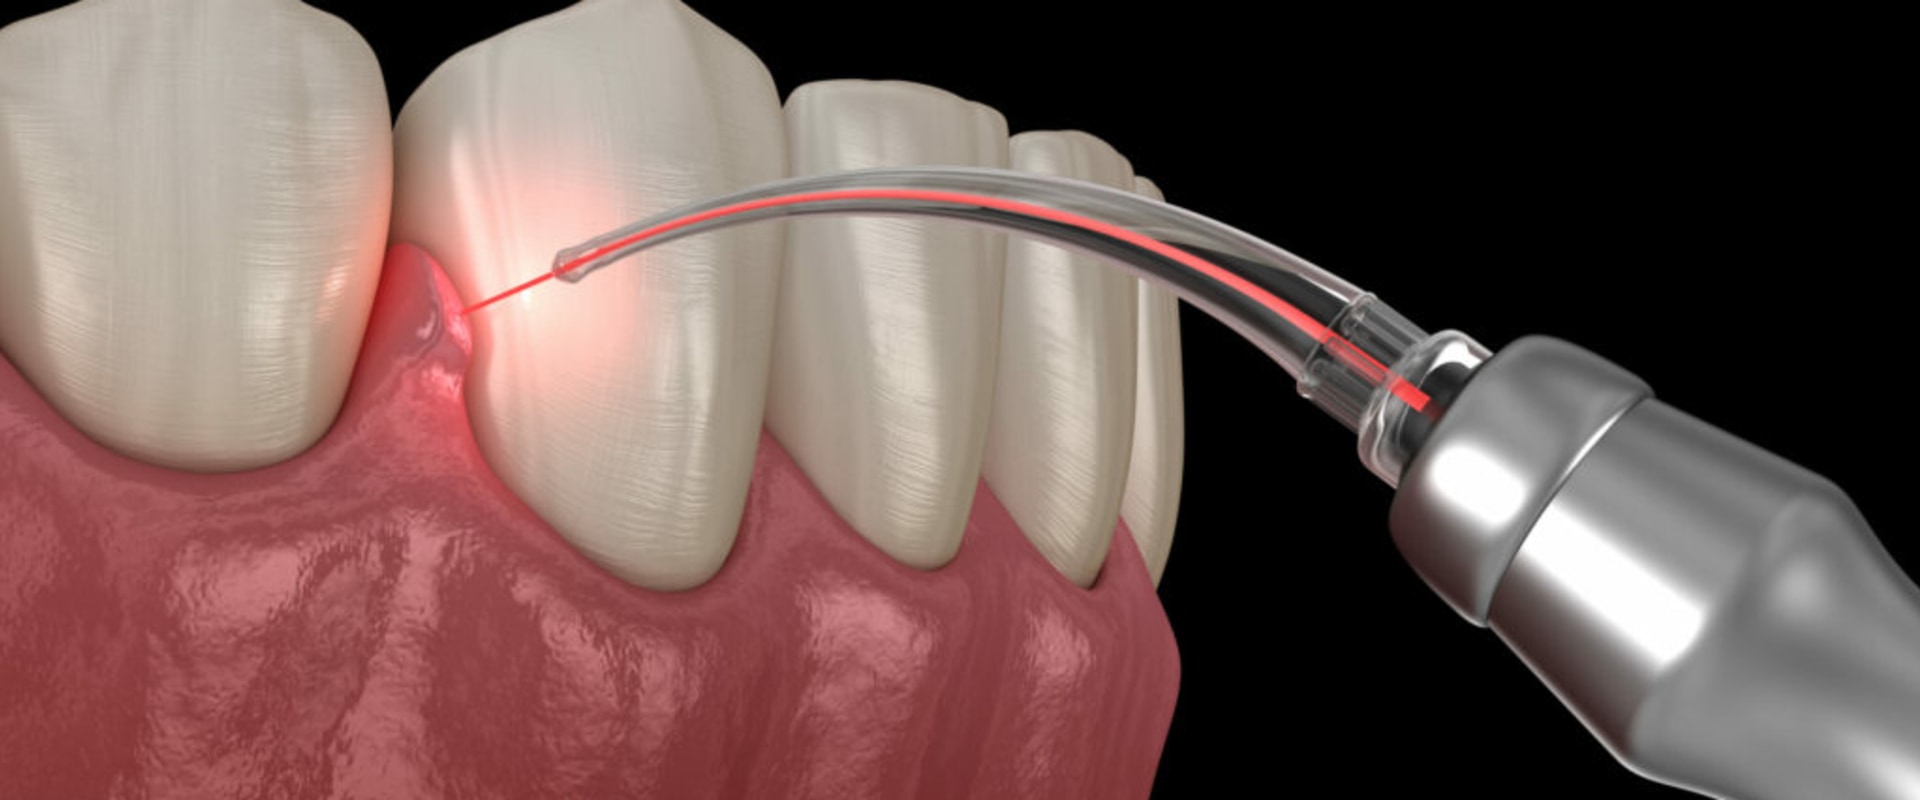 What is soft tissue laser dentistry?